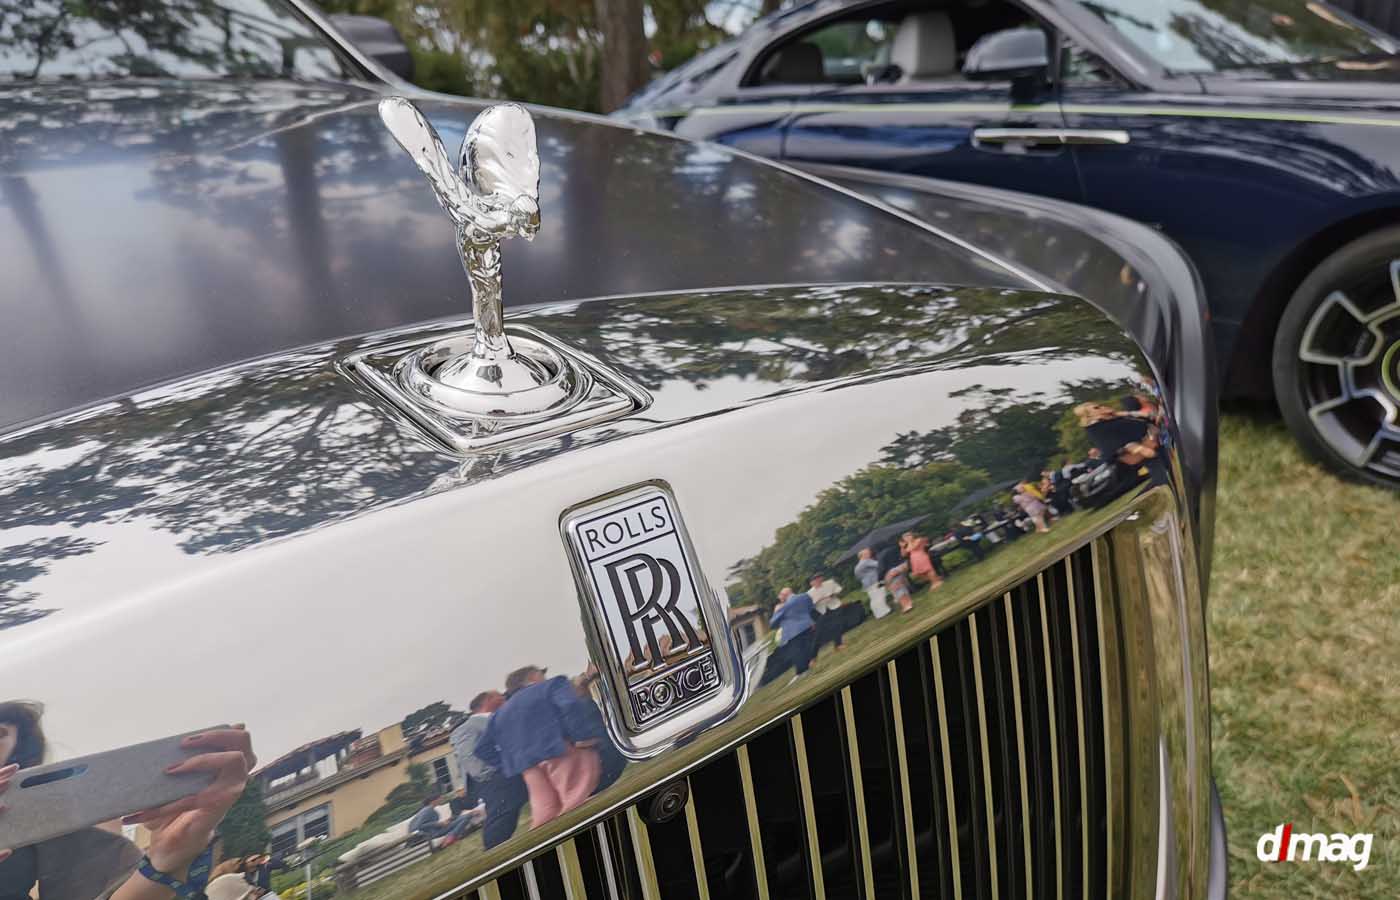 RollsRoyce reinvents Cars  Coffee meets with Cars  Cognac evening   Driving